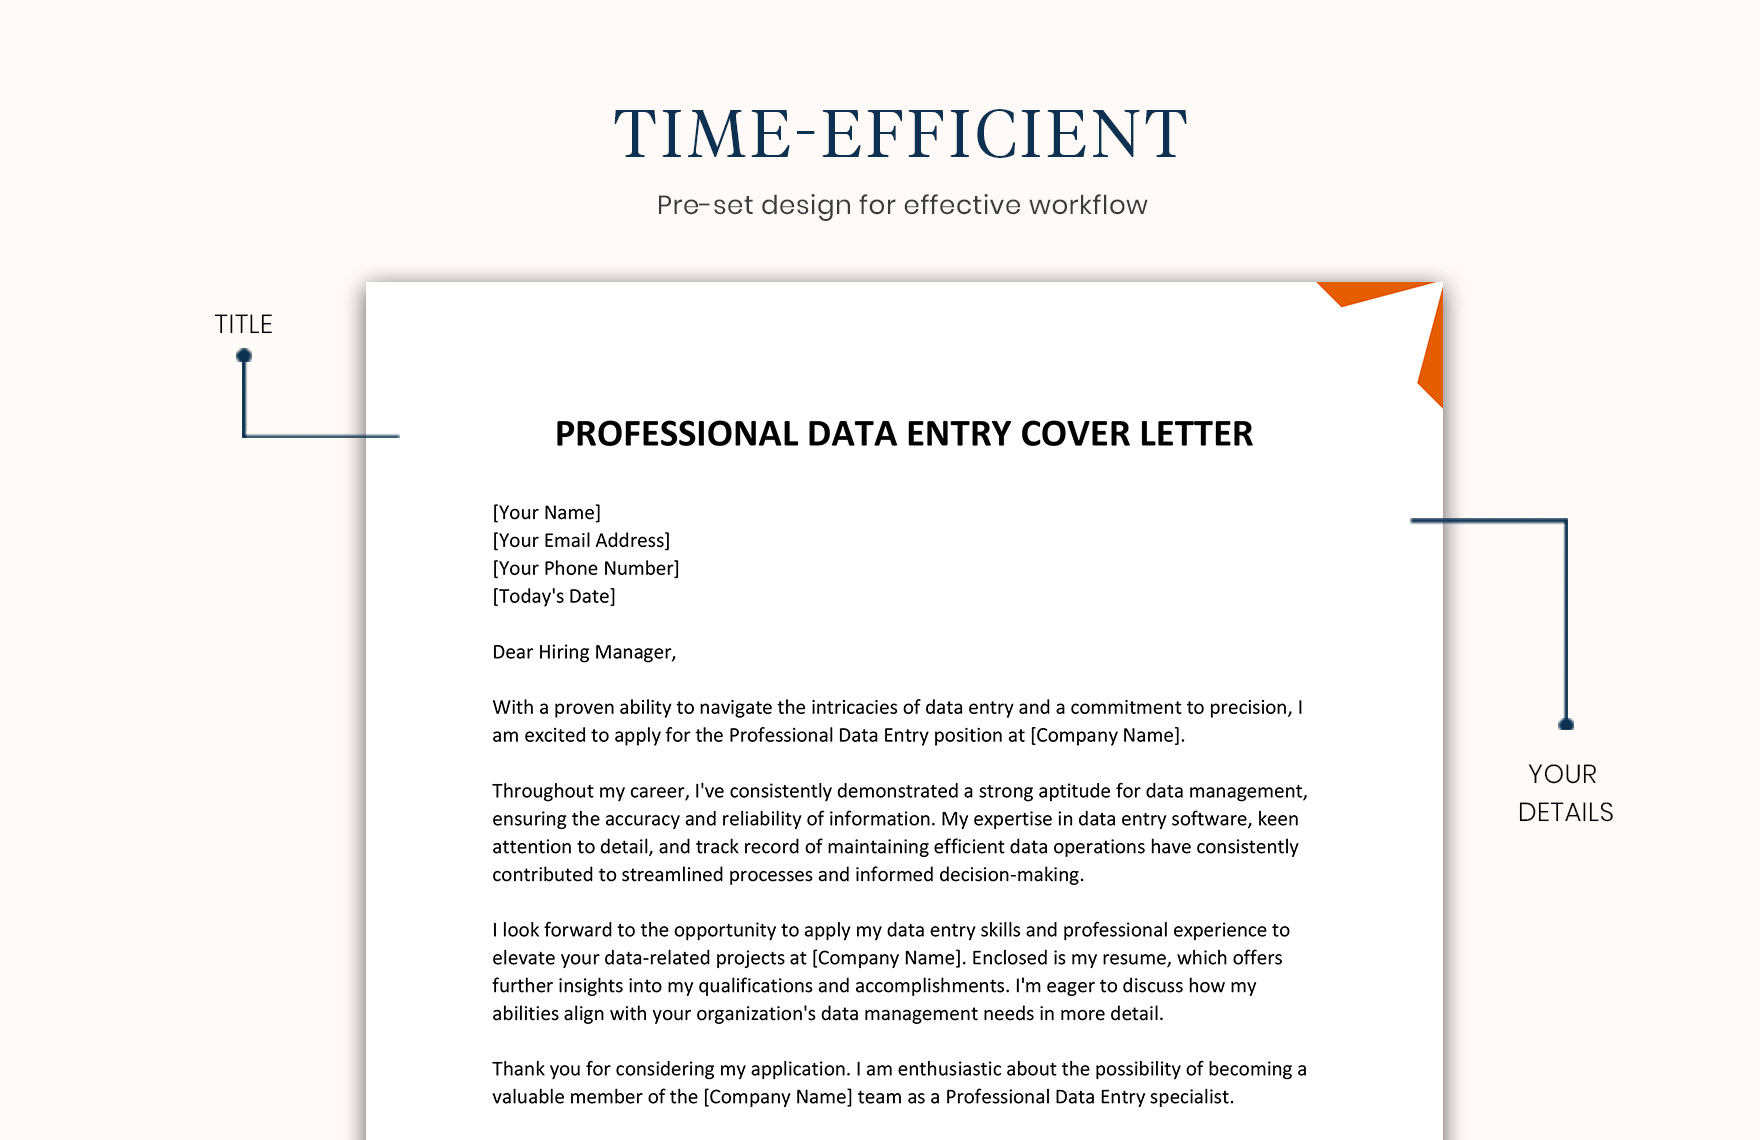 Professional Data Entry Cover Letter